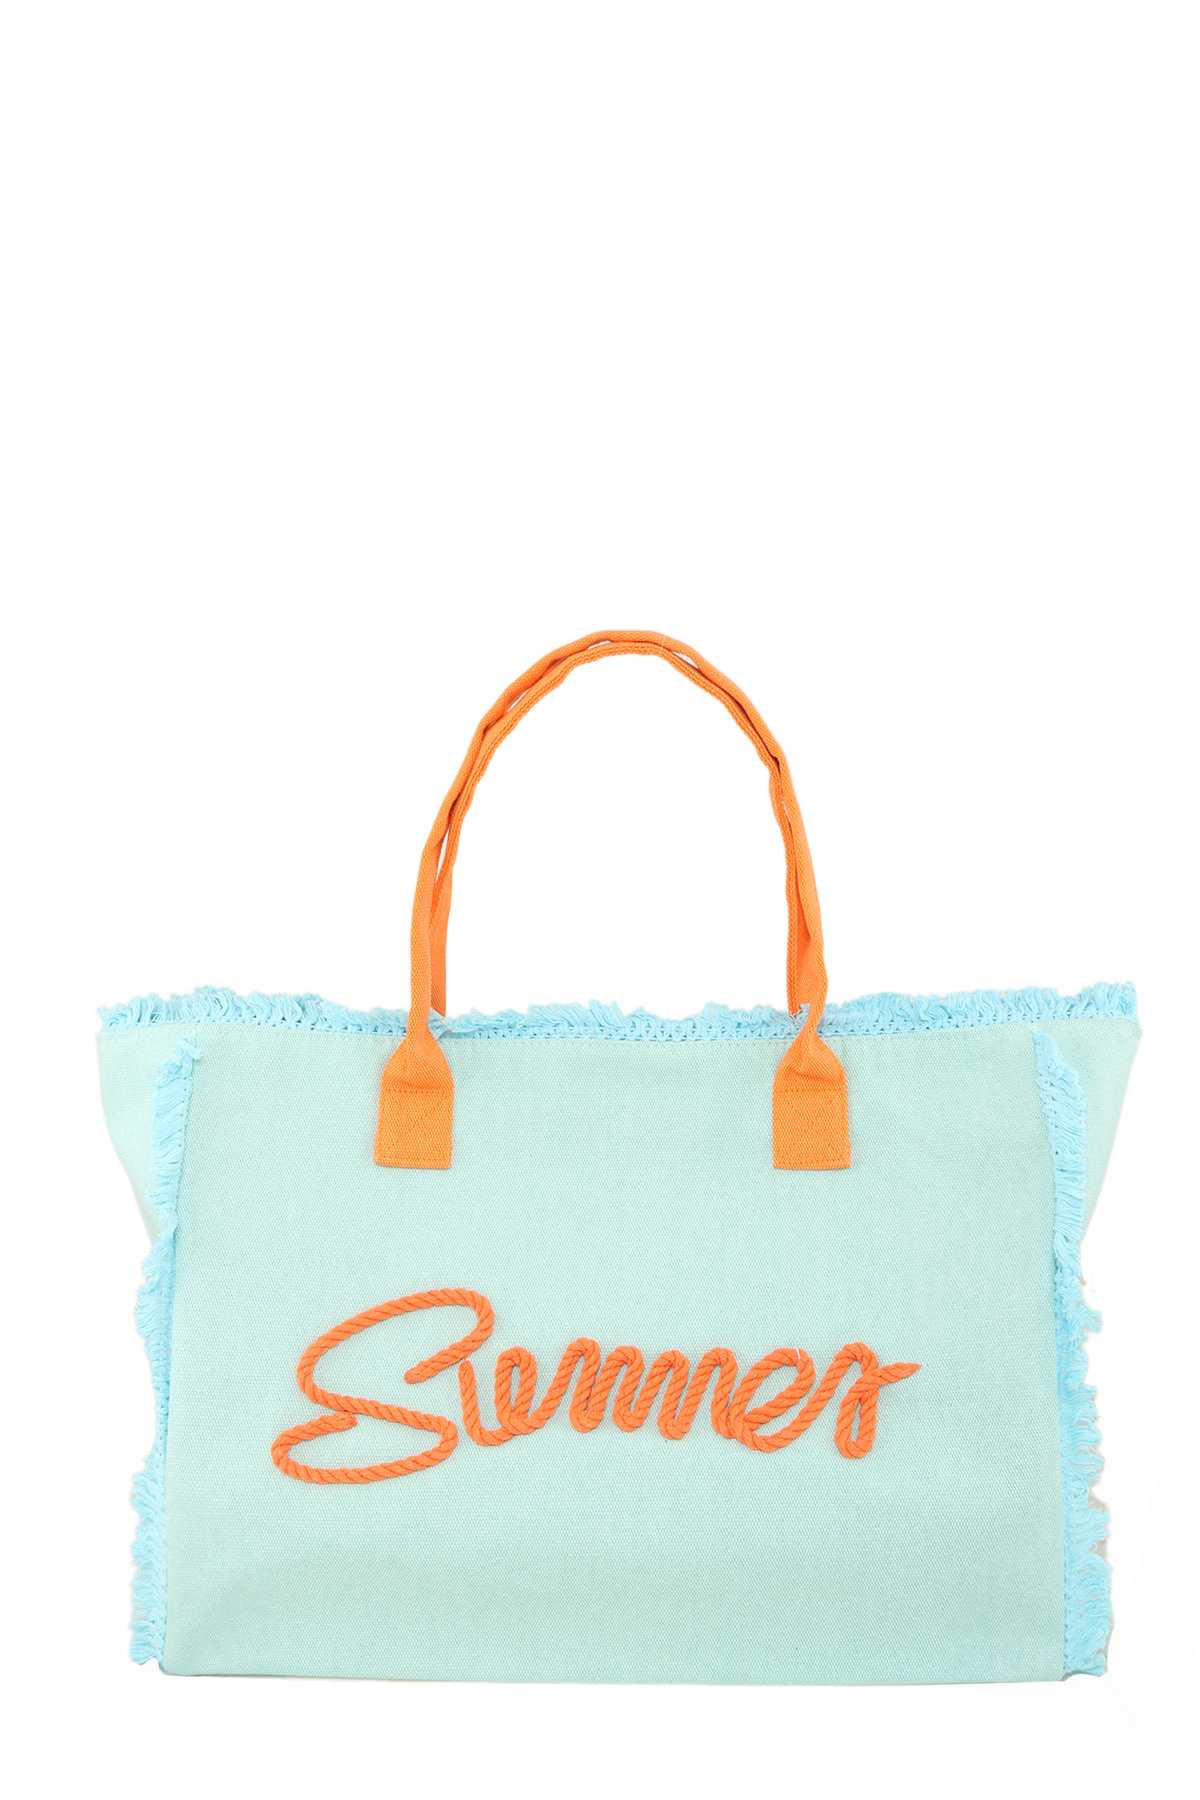 SUMMER STYLE FABRIC TOTE BAG